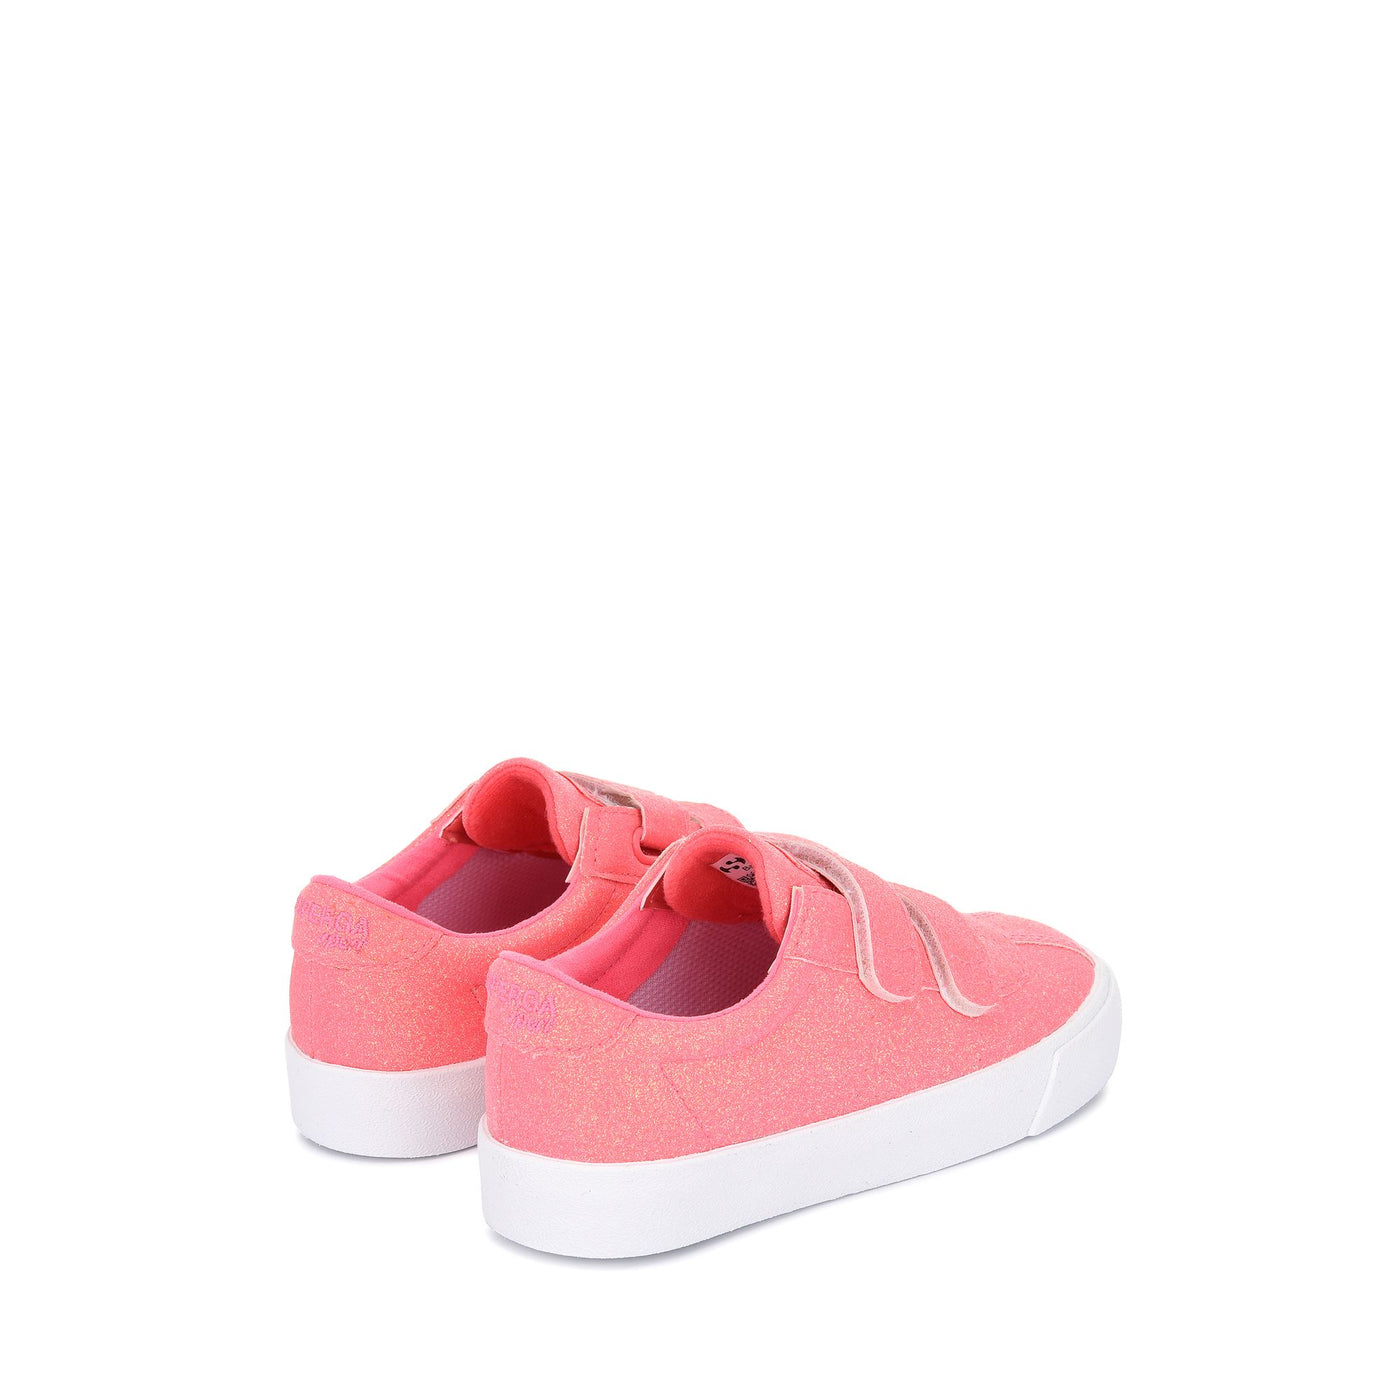 Sneakers Girl 2843 KIDS CLUB S STRAPS GLITTER Low Cut COTTON CANDY Dressed Side (jpg Rgb)		